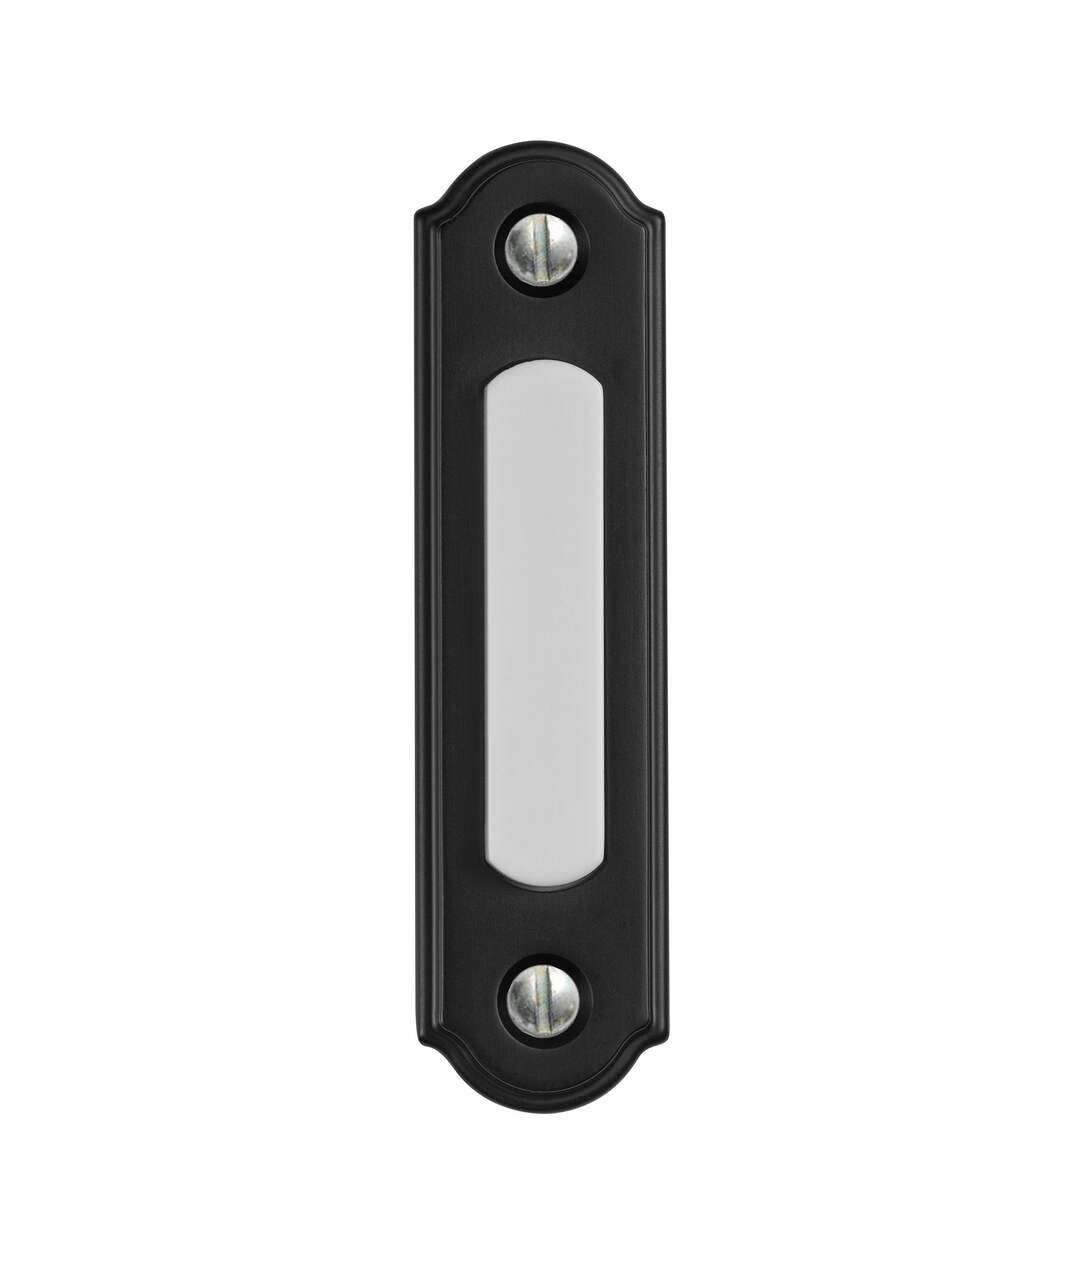 HeathZenith Wired Lighted Metal Push Doorbell Chime Button, Black